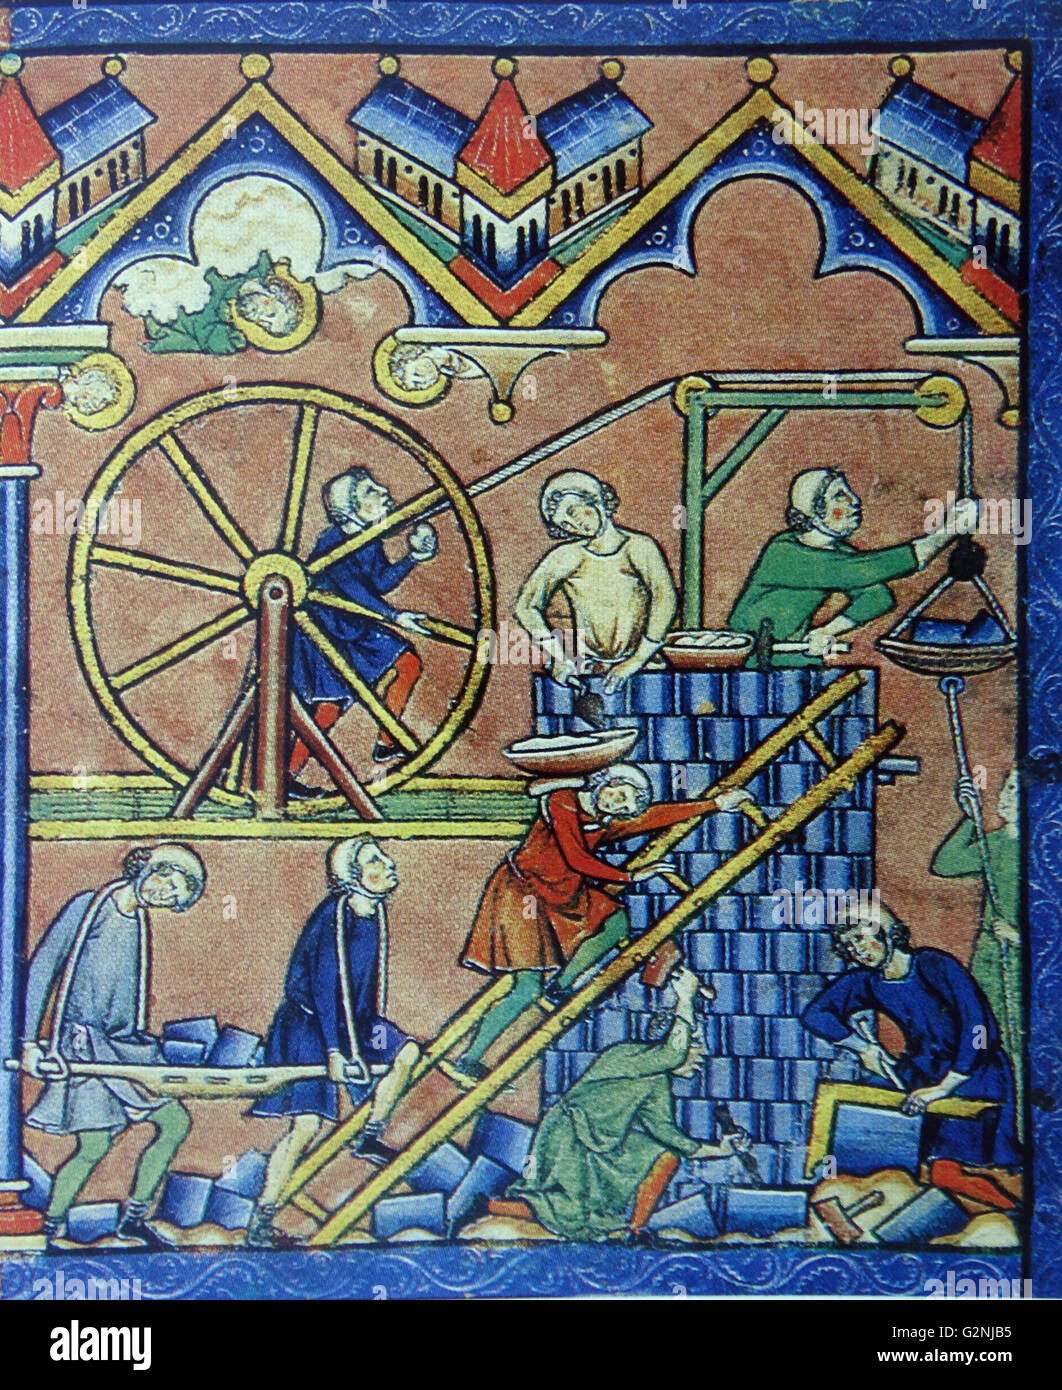 Miniature of a hosting system. A hosting system consisted of cranes attached to great wheels worked either like a capstan or like a treadmill. The miniature depicts the treadmill type, masons laying chequered masonry and a man carrying the mortar up a ladder. Dated 13th Century Stock Photo